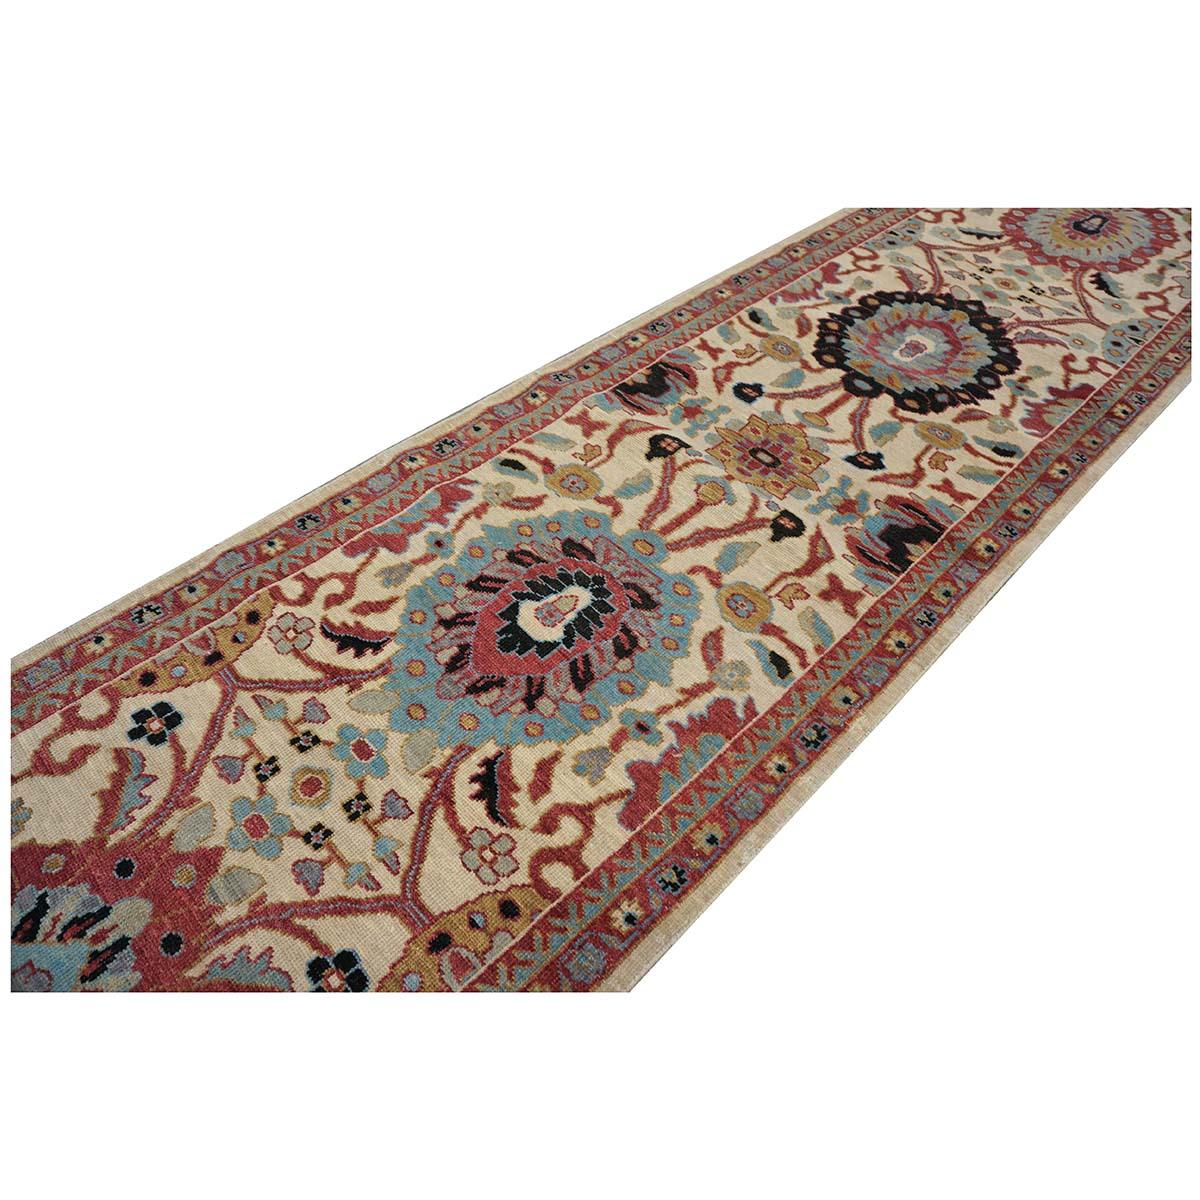 Contemporary 21st Century Sultanabad Master 3x12 Ivory, Red, & Blue Hallway Runner Rug For Sale